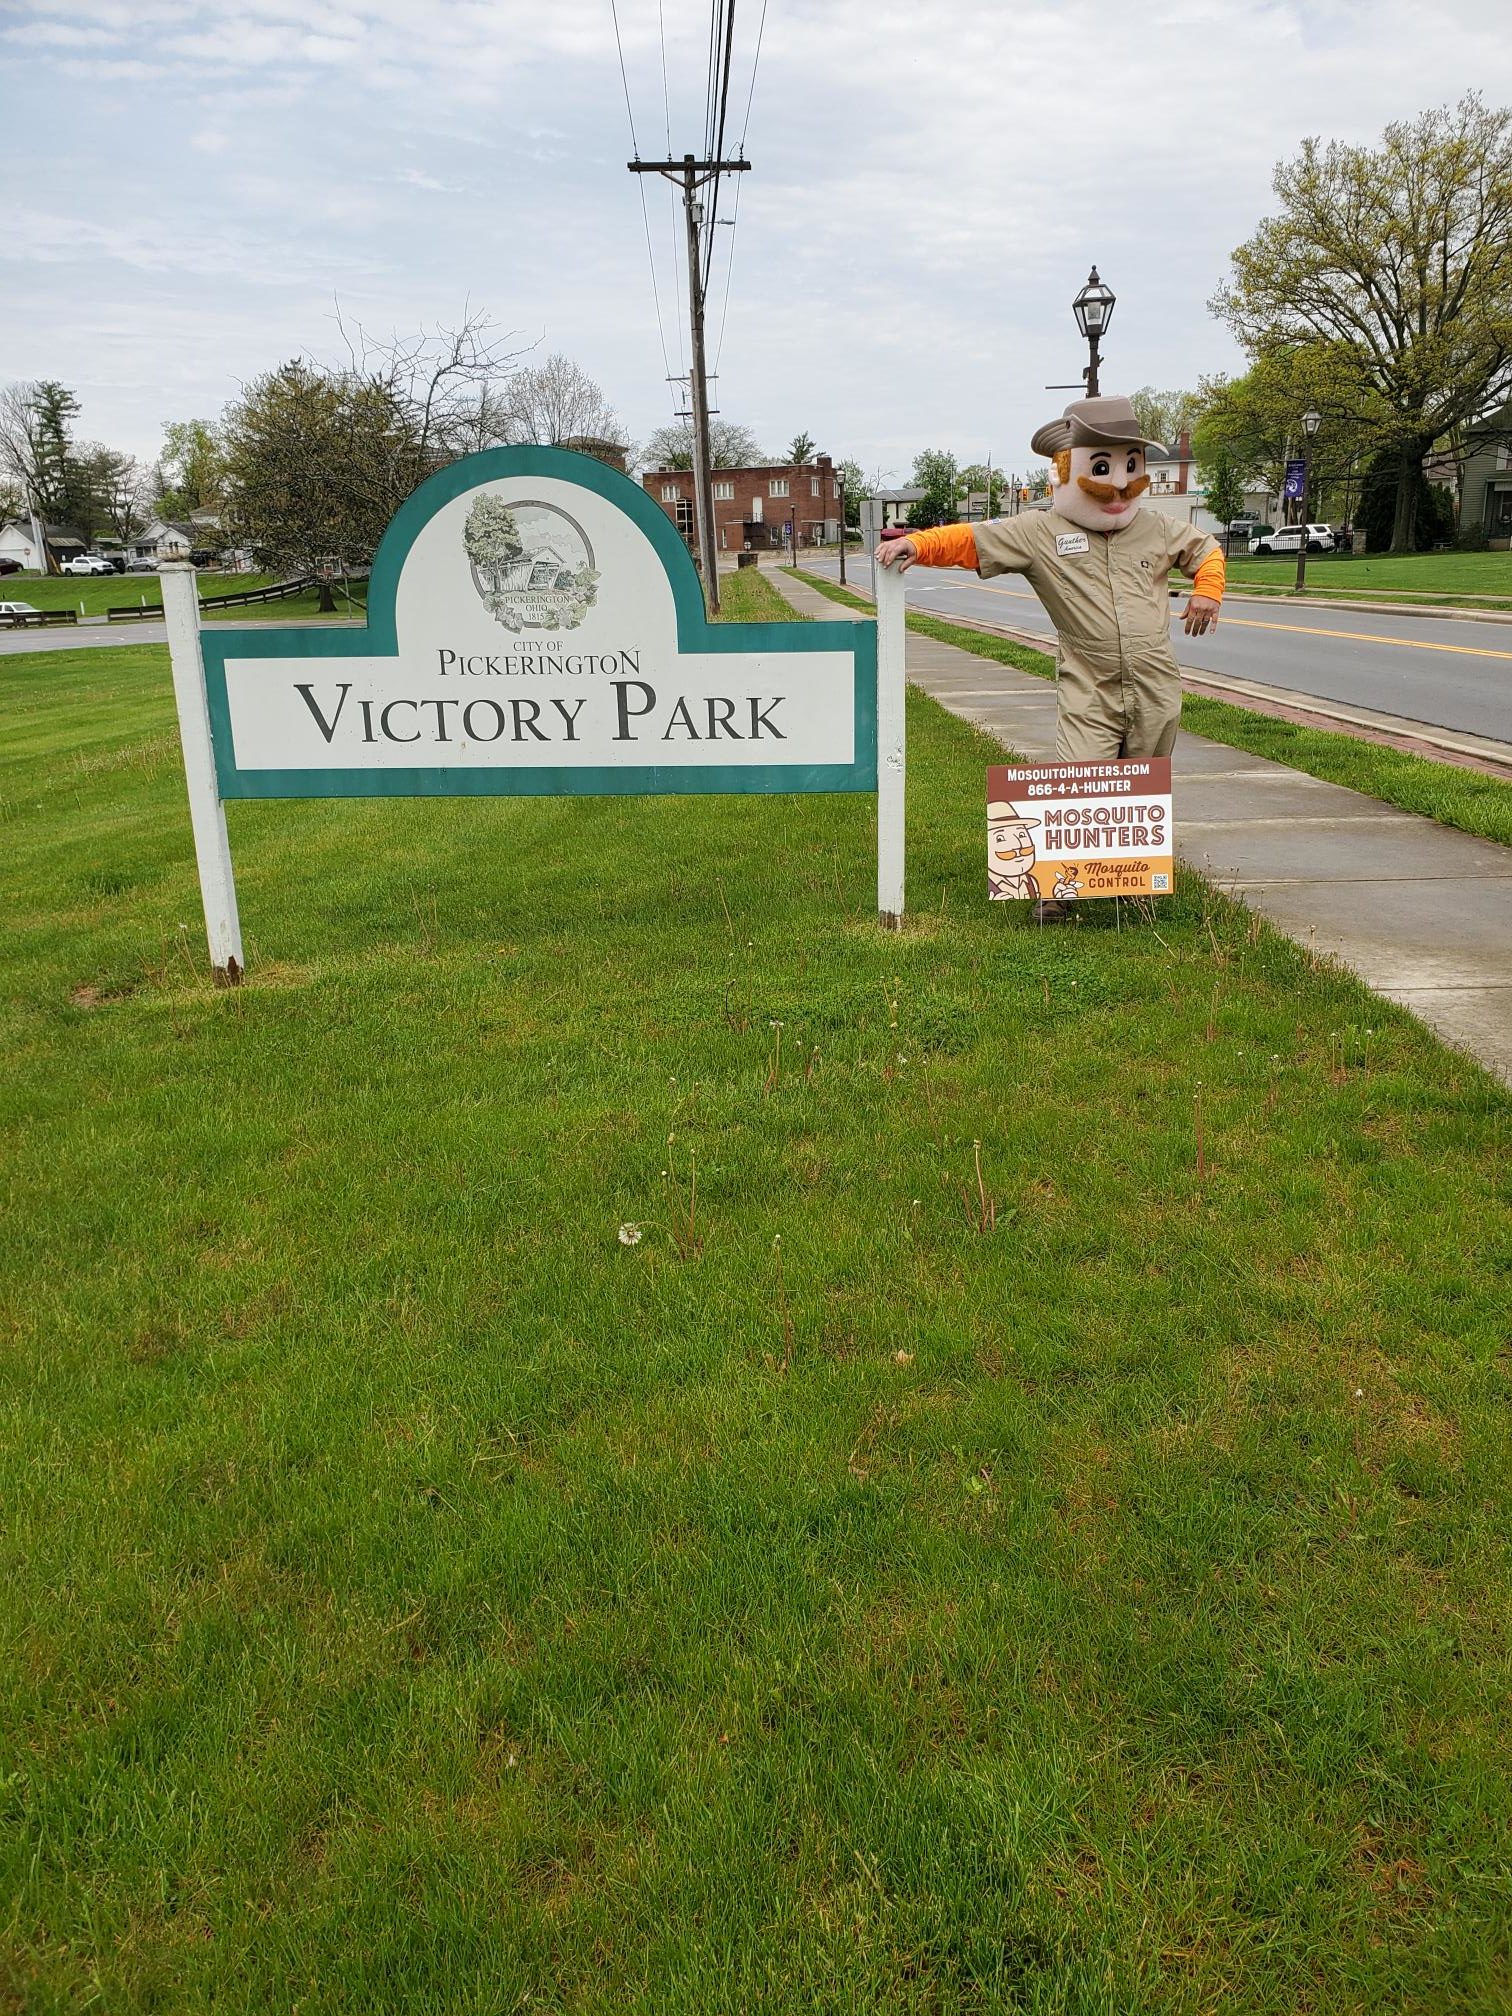 Mosquito Hunters Gunther at Victory Park sign in Pickerington